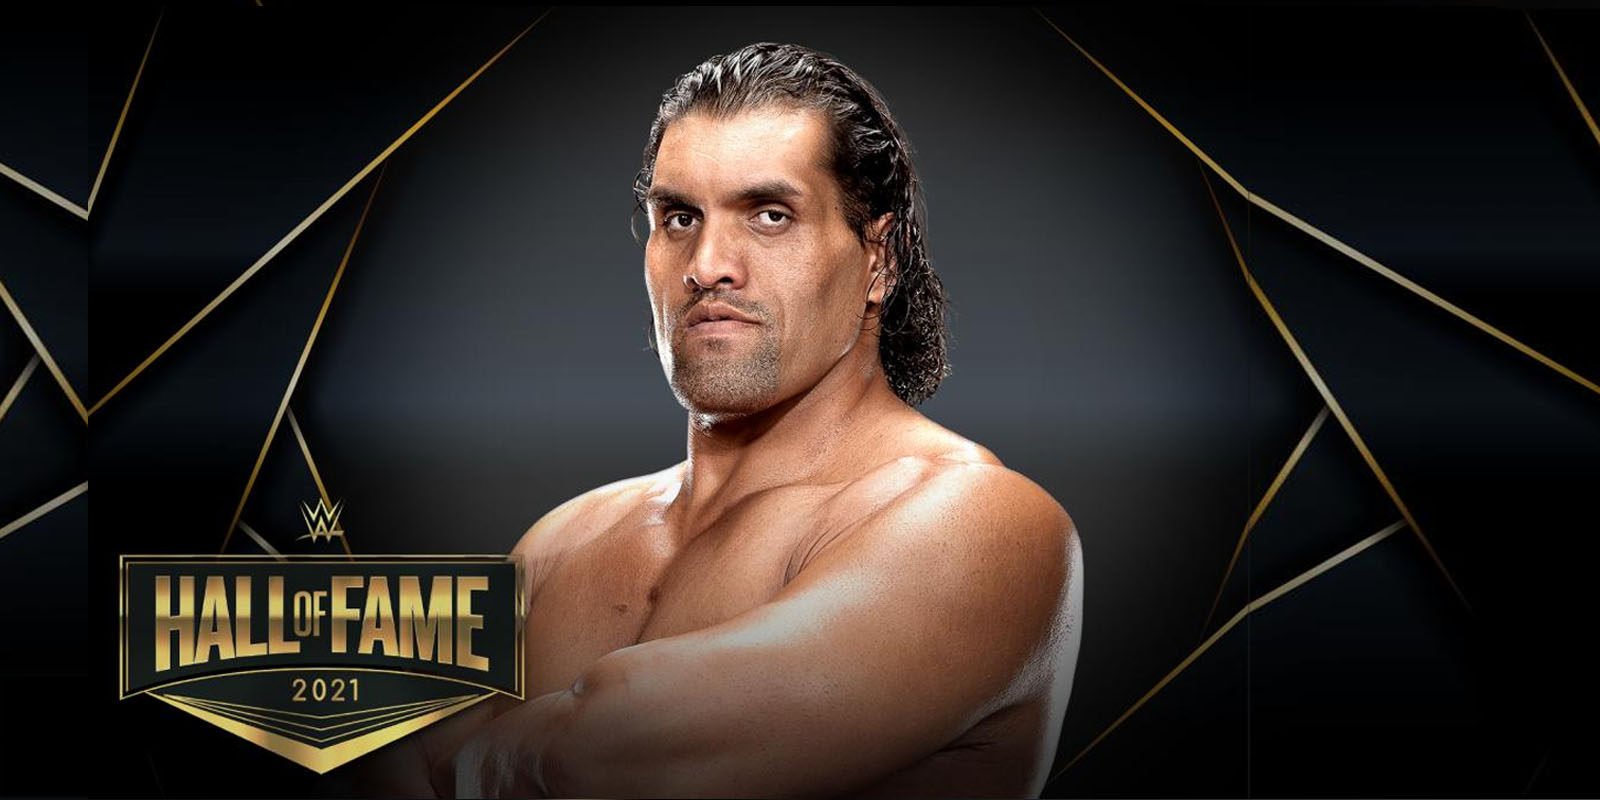 Great Khalli in hall of fame wwe